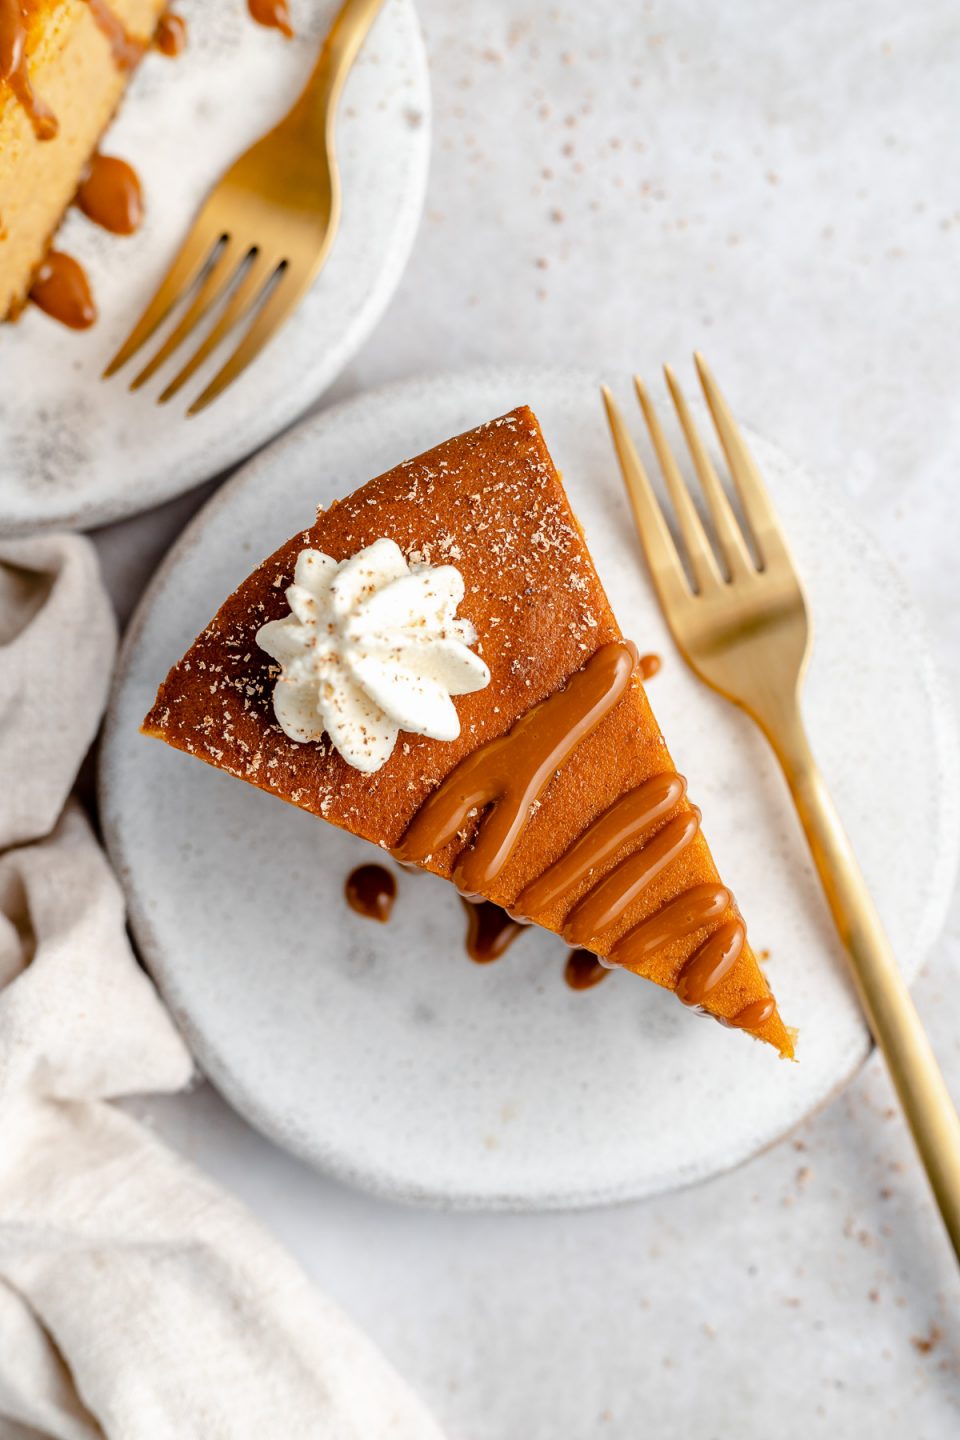 Overhead angle of sliced pumpkin cheesecake, served on a small ceramic plate. The cheesecake is topped with salted caramel, fresh whipped cream, & grated nutmeg. Sitting next to the cheesecake is a large gold fork. A second plate of cheesecake peeks into the top of the frame.